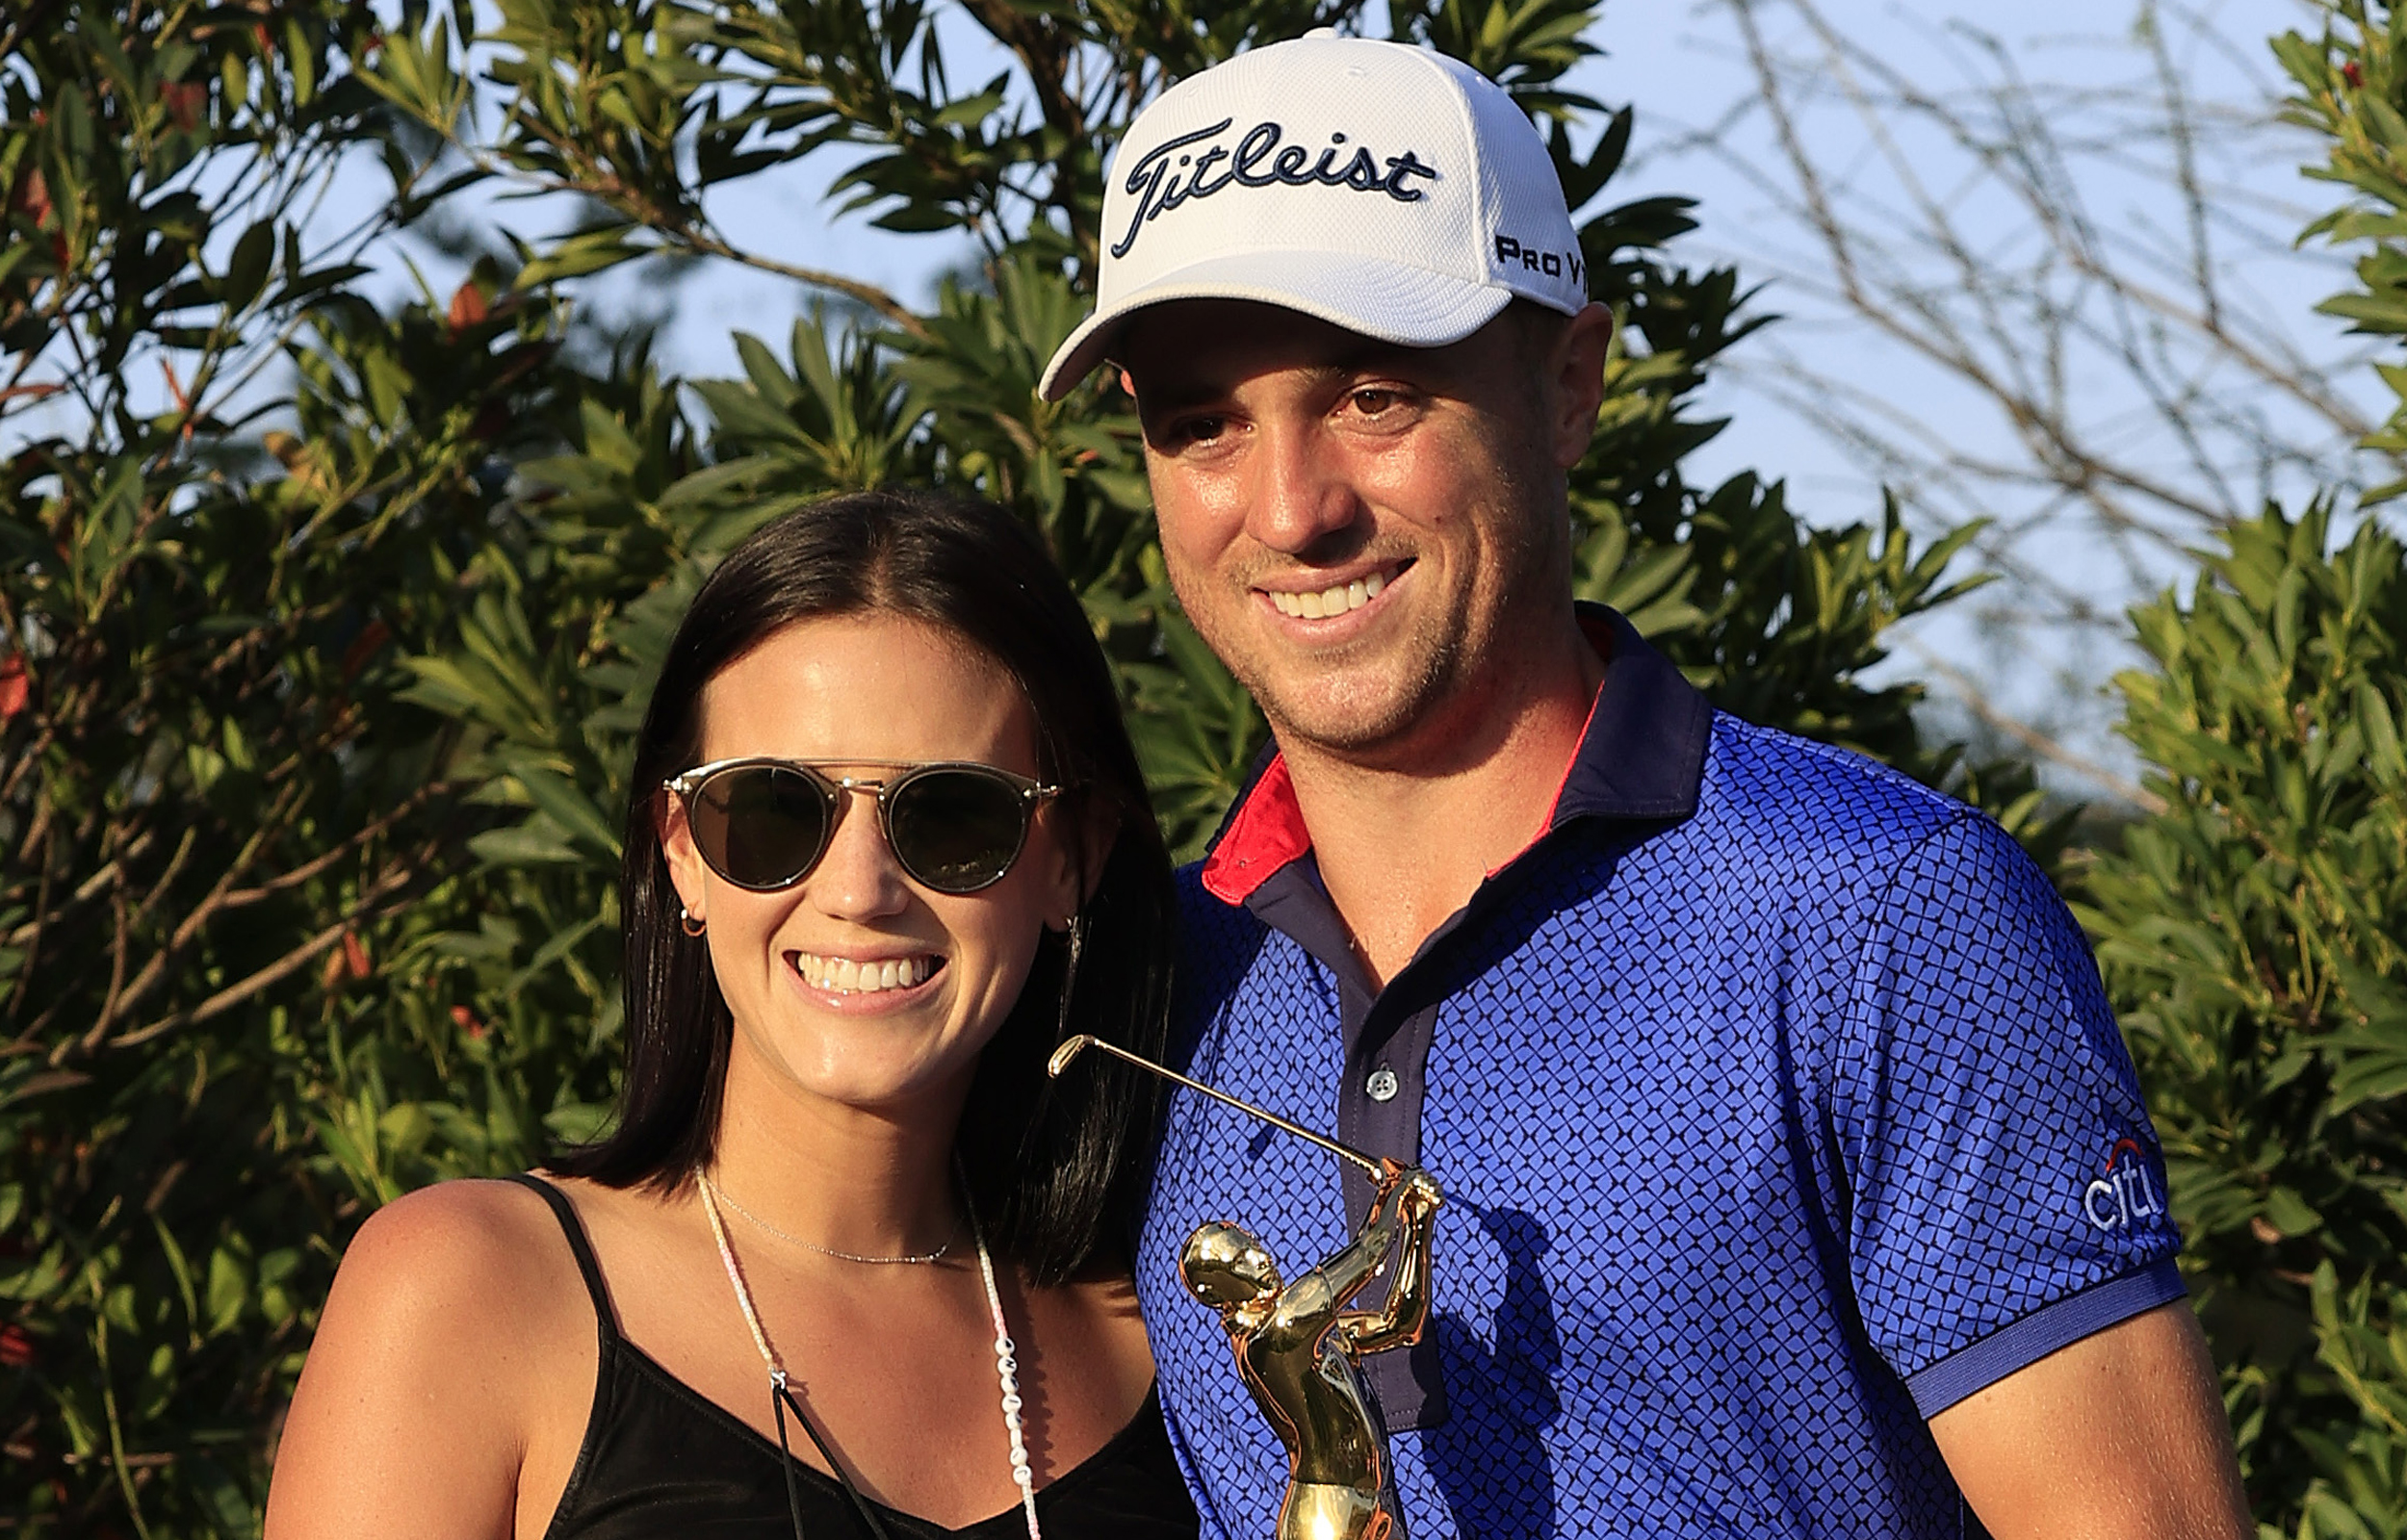 Who Is Justin Thomas' Wife?